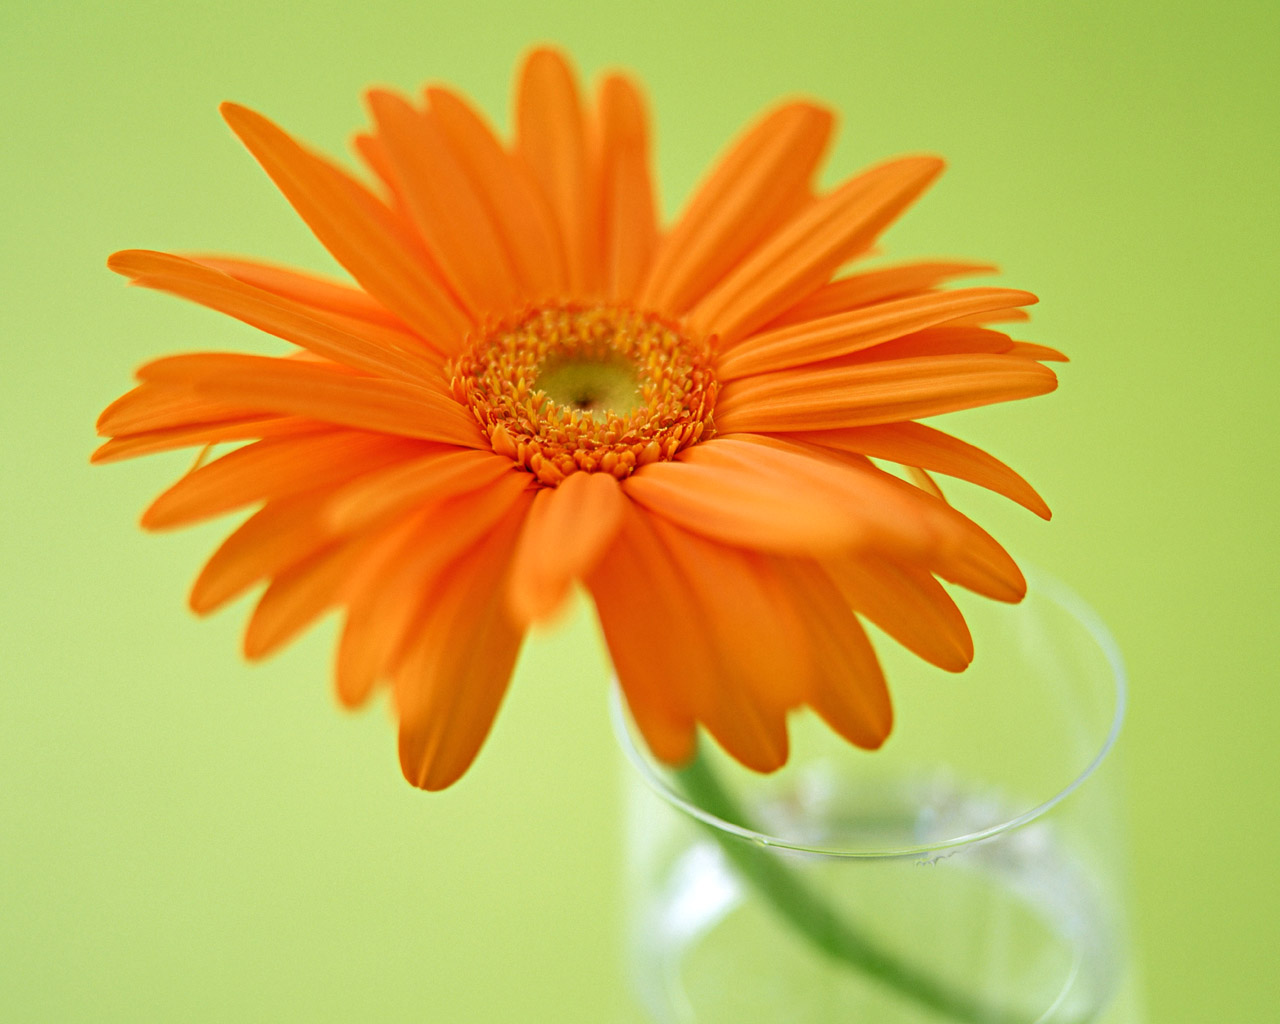 Gerbera Daisy background Wallpapers   HD Wallpapers 15567